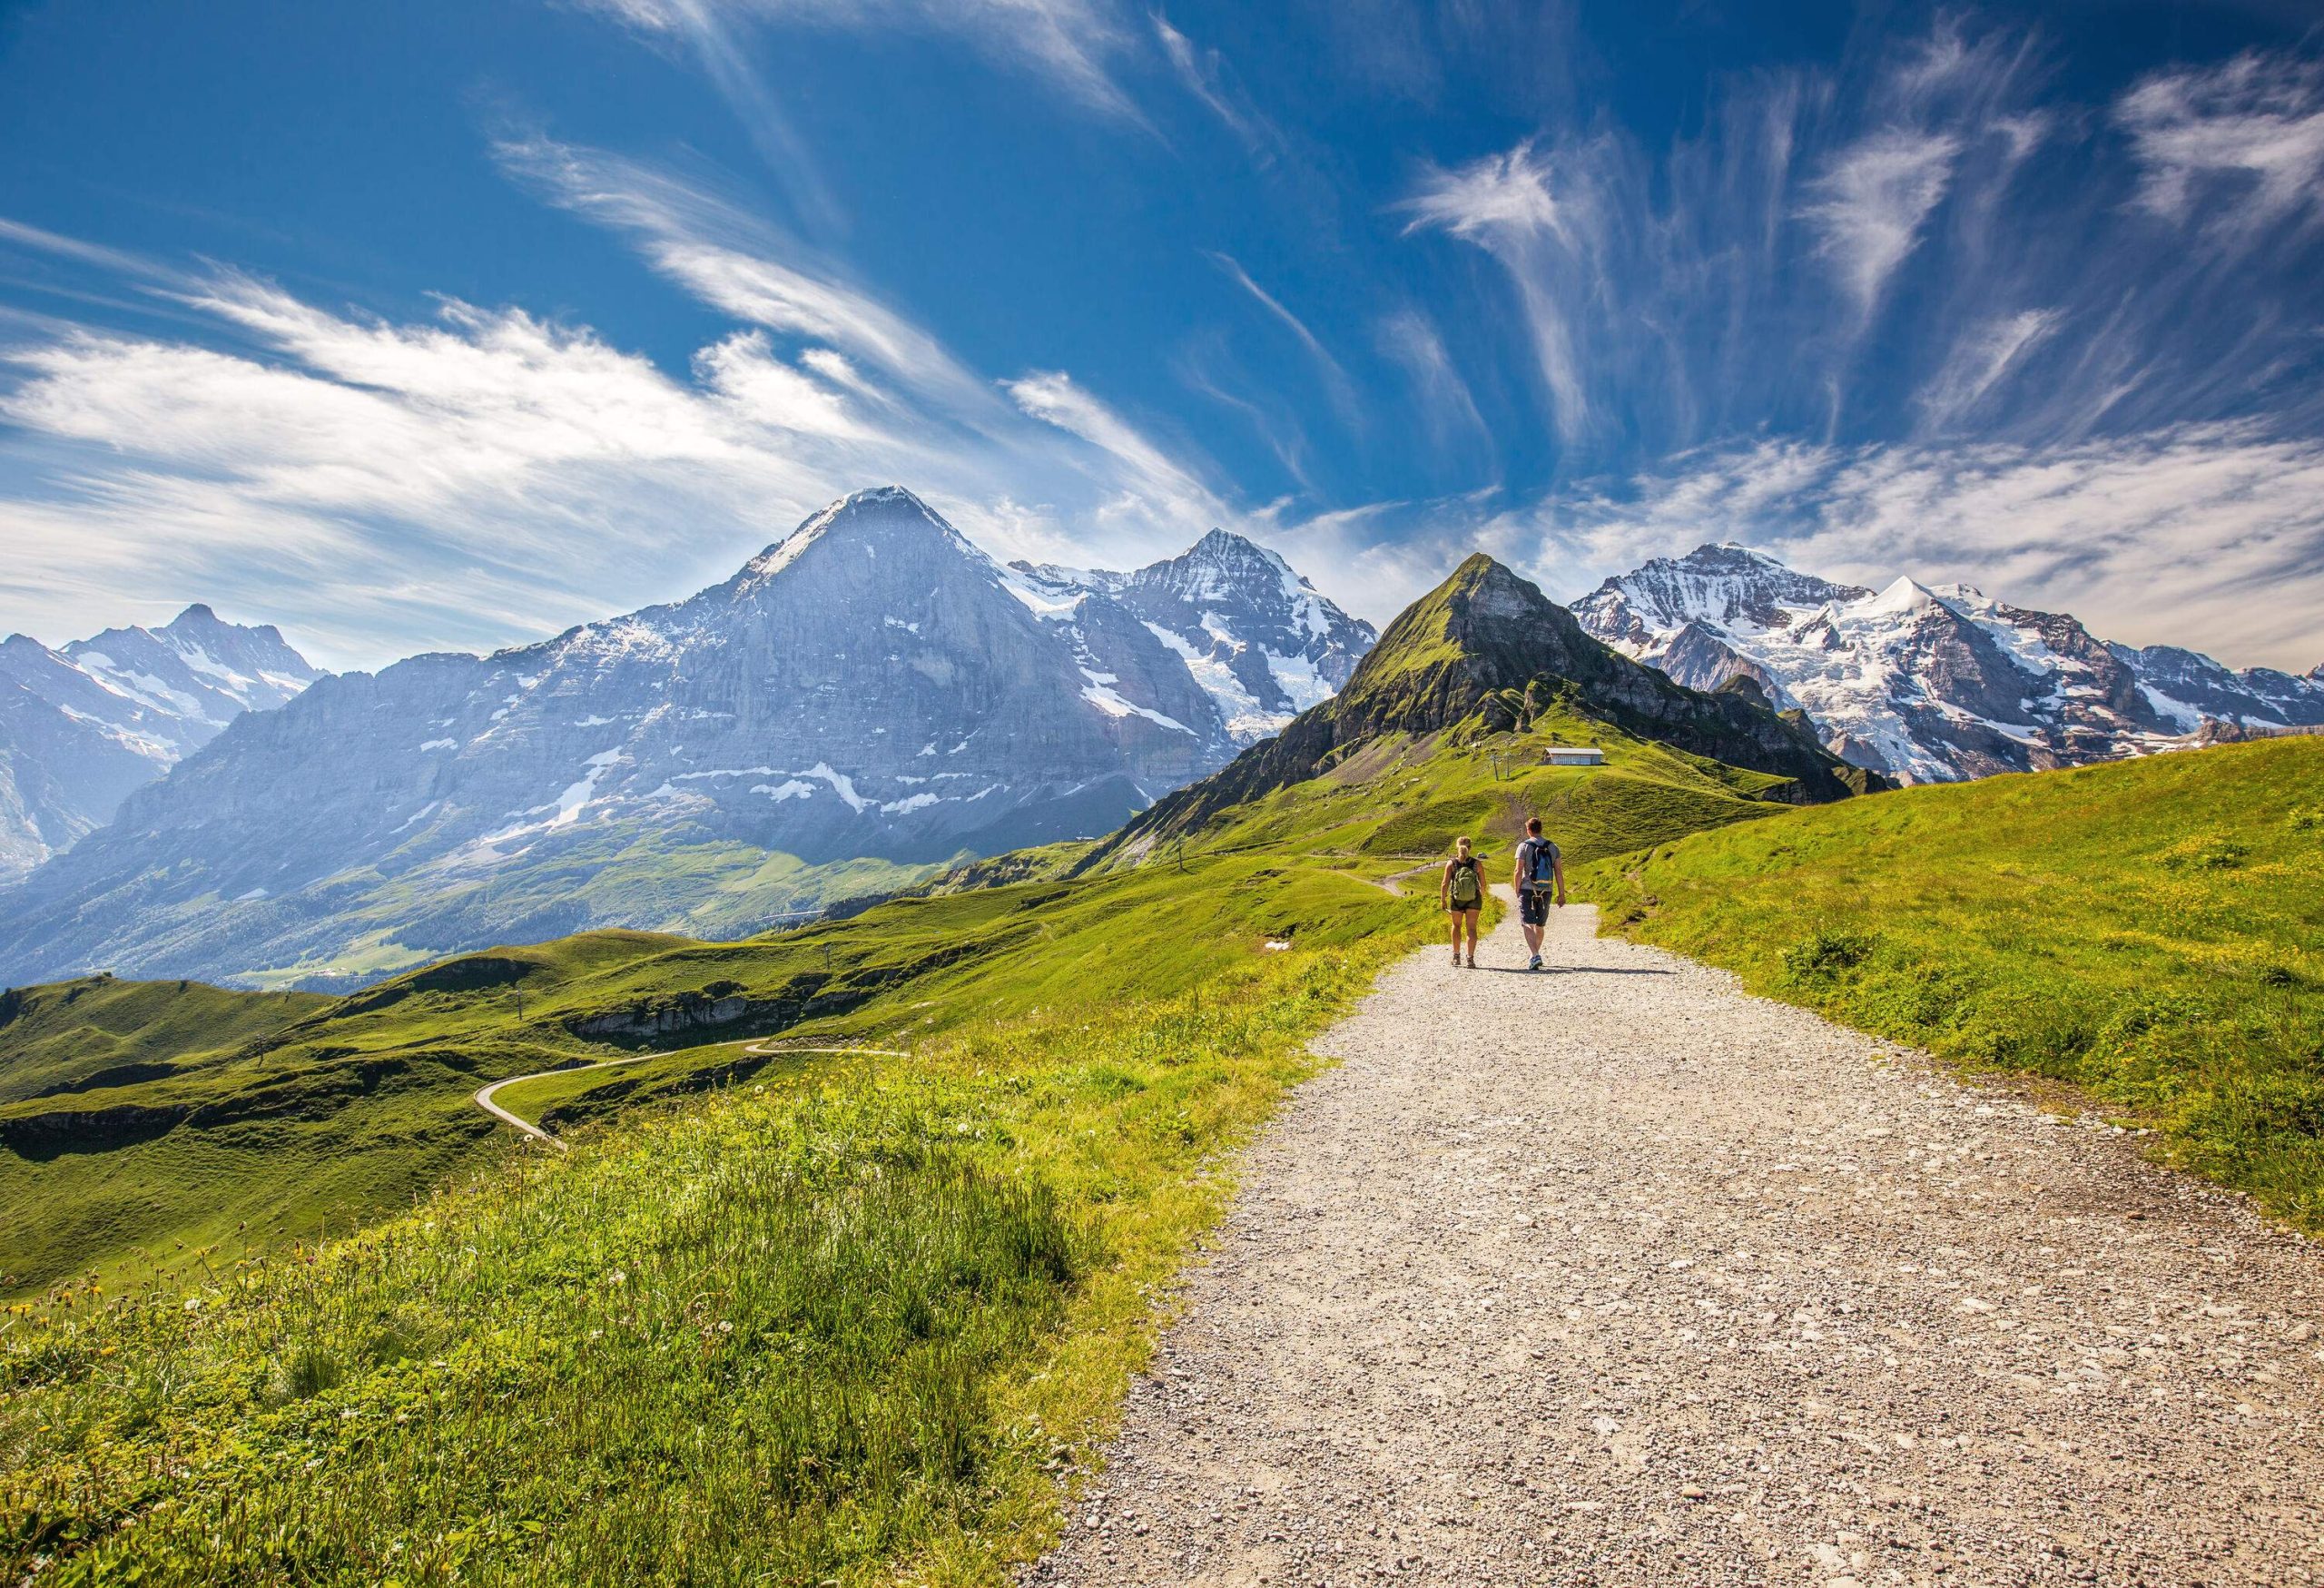 Two people walk along a sandy path surrounded by greenery, with snow-capped crags and streaks of clouds in the sky.